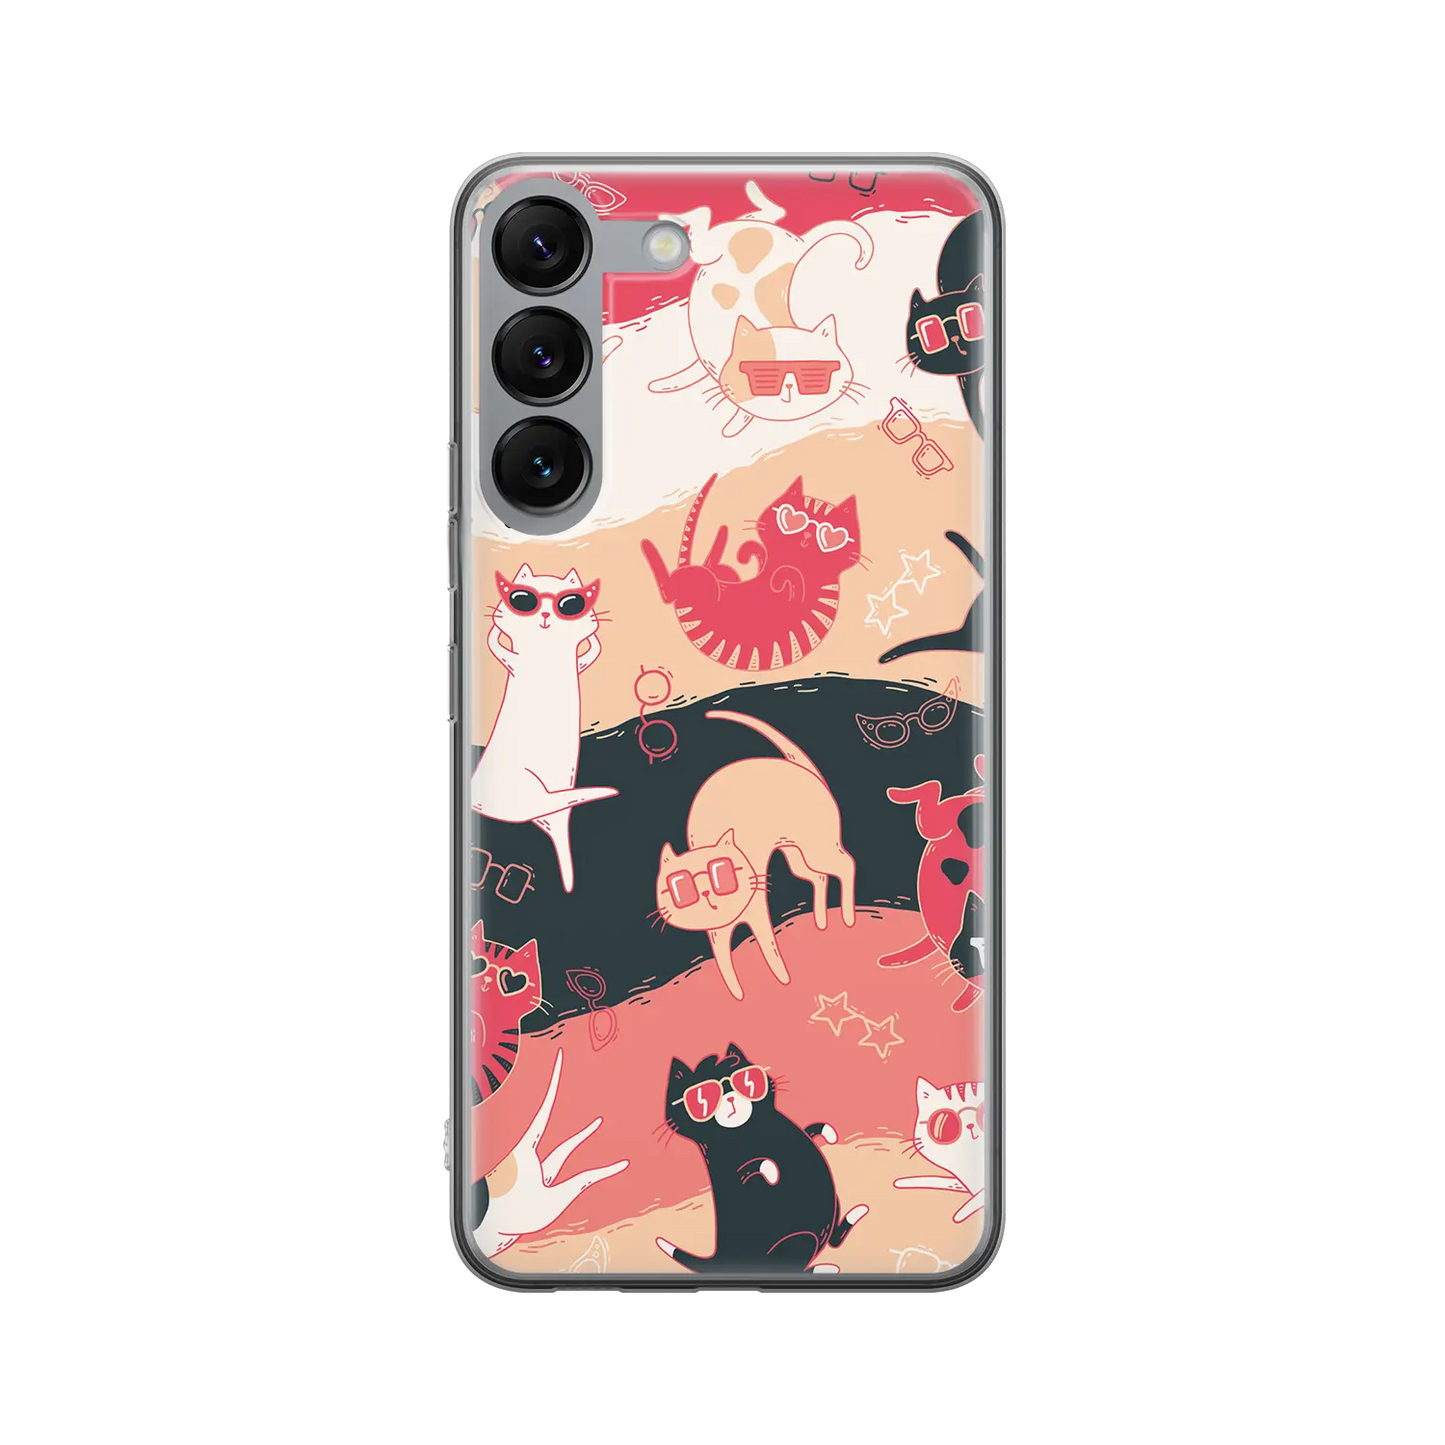 Aristocats - Personalised Galaxy S Case